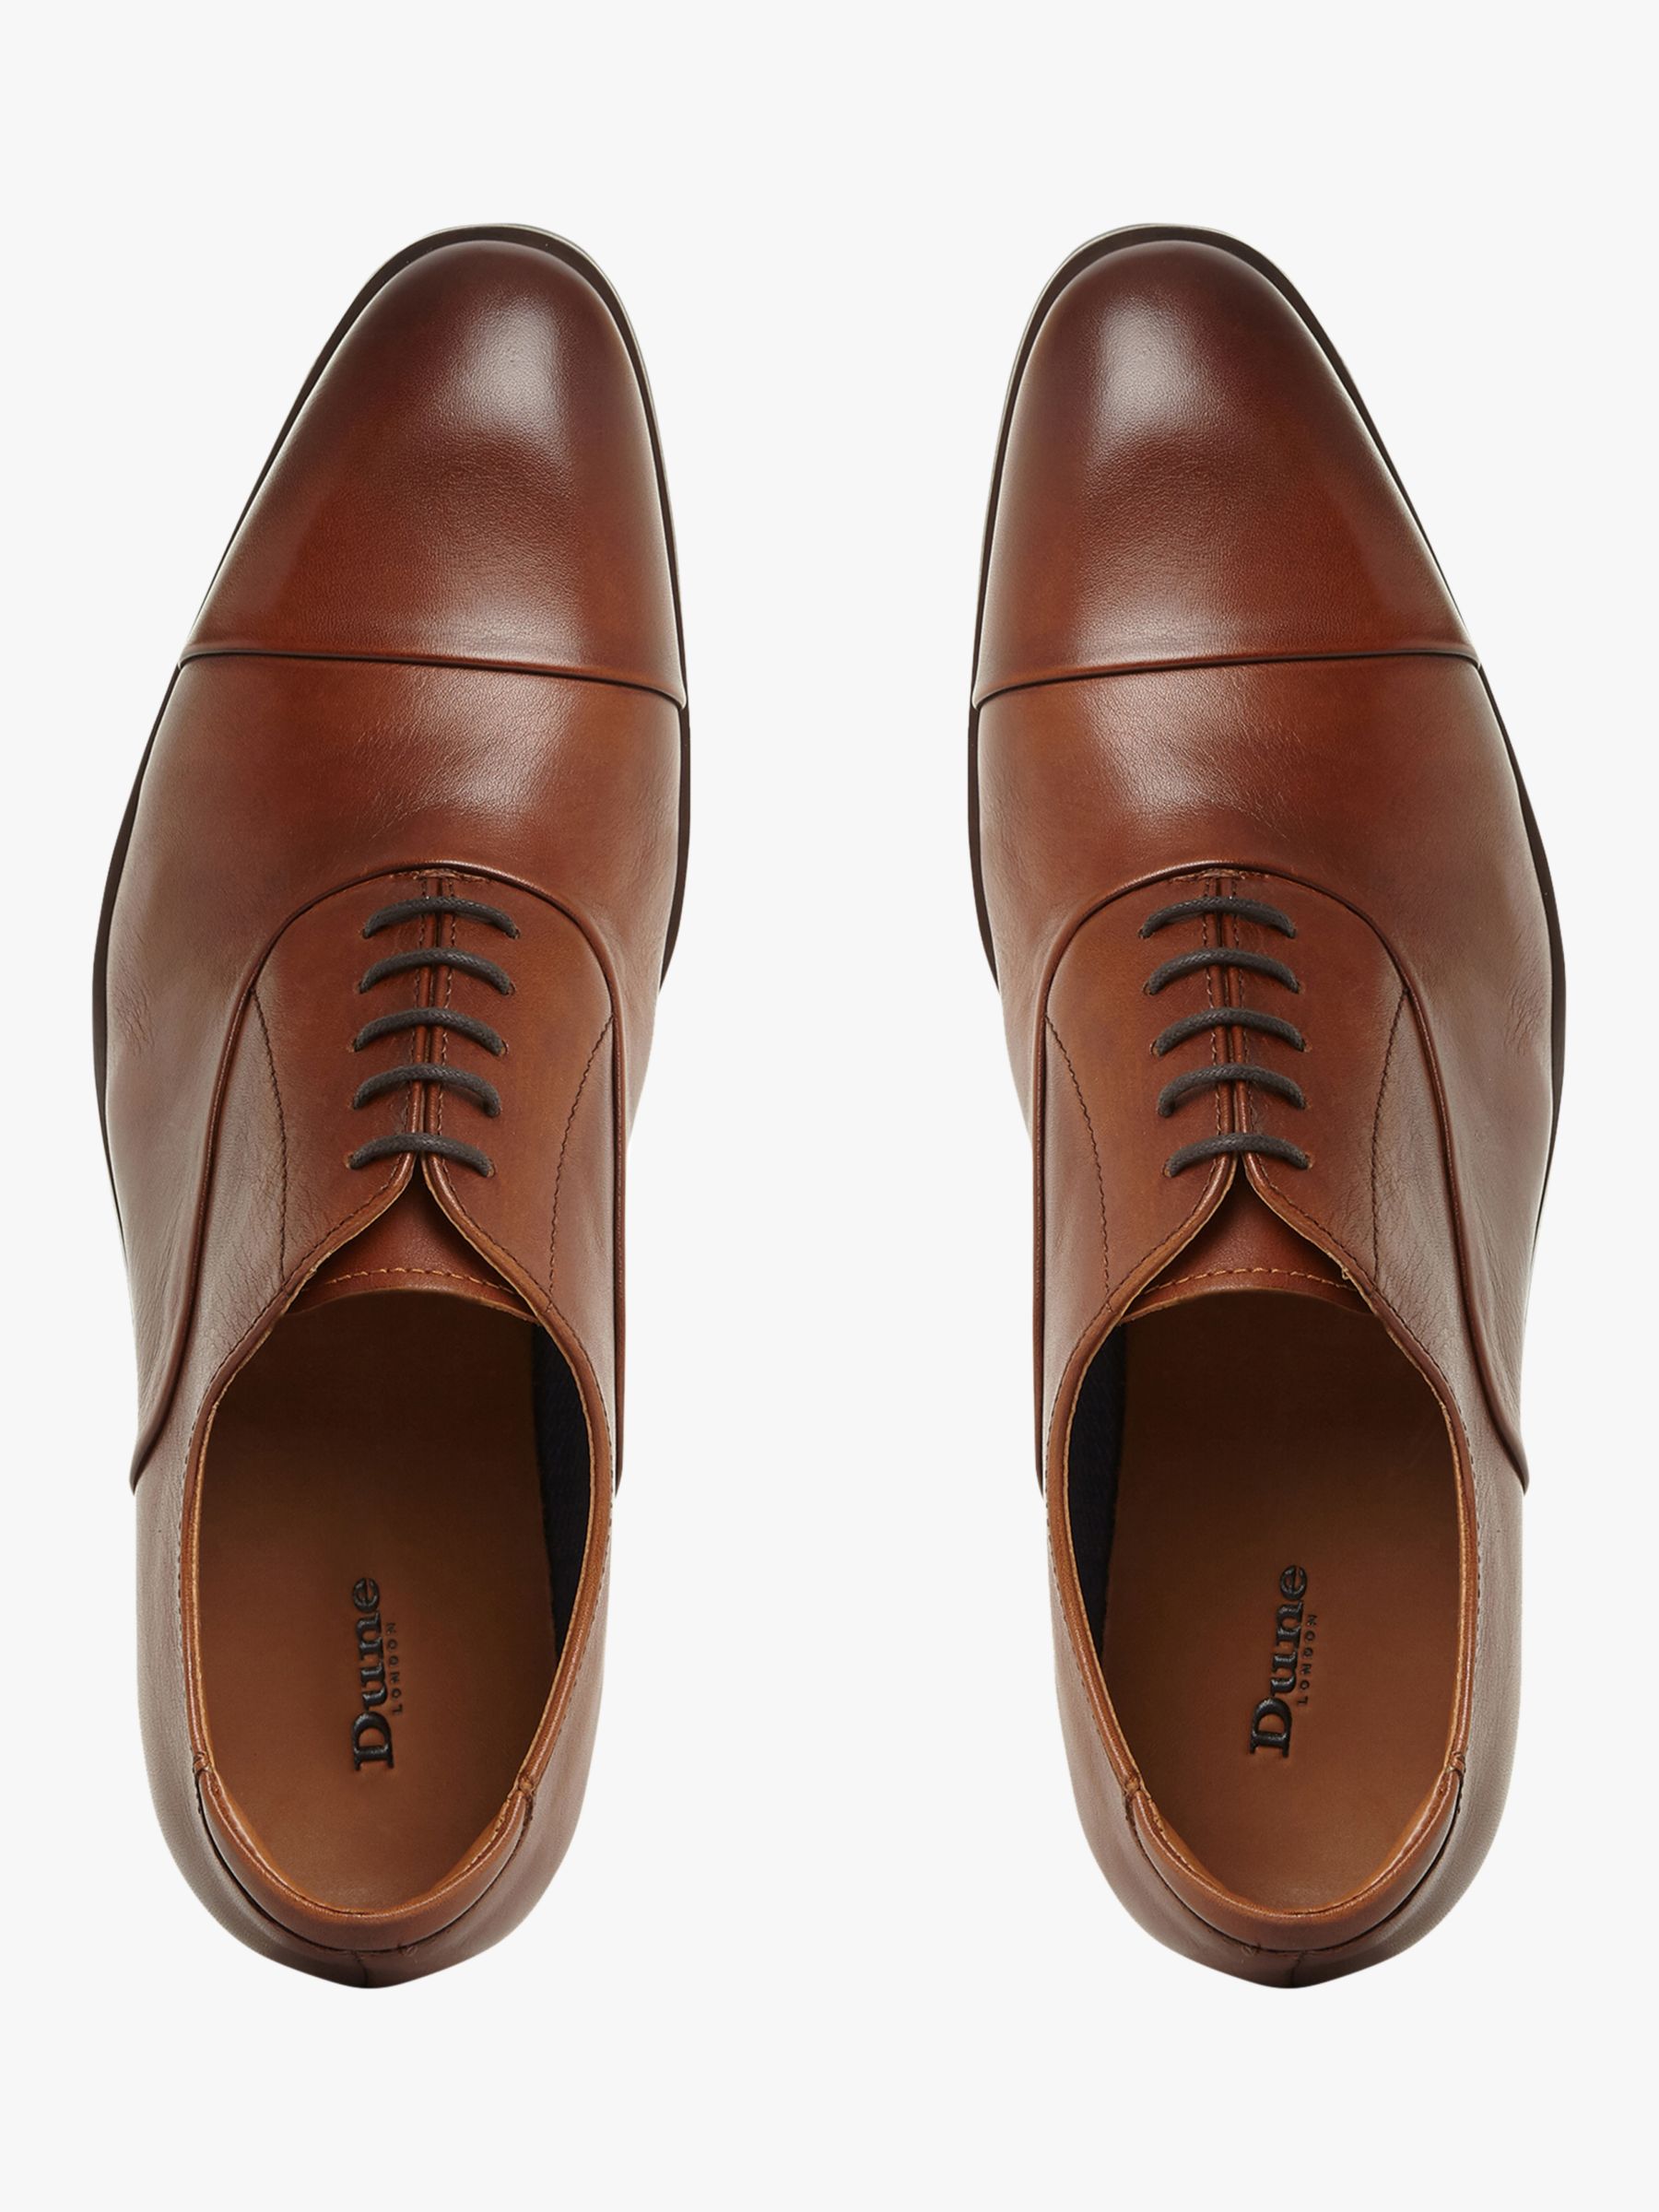 Dune Secret Leather Oxford Shoes, Tan-Leather at John Lewis & Partners